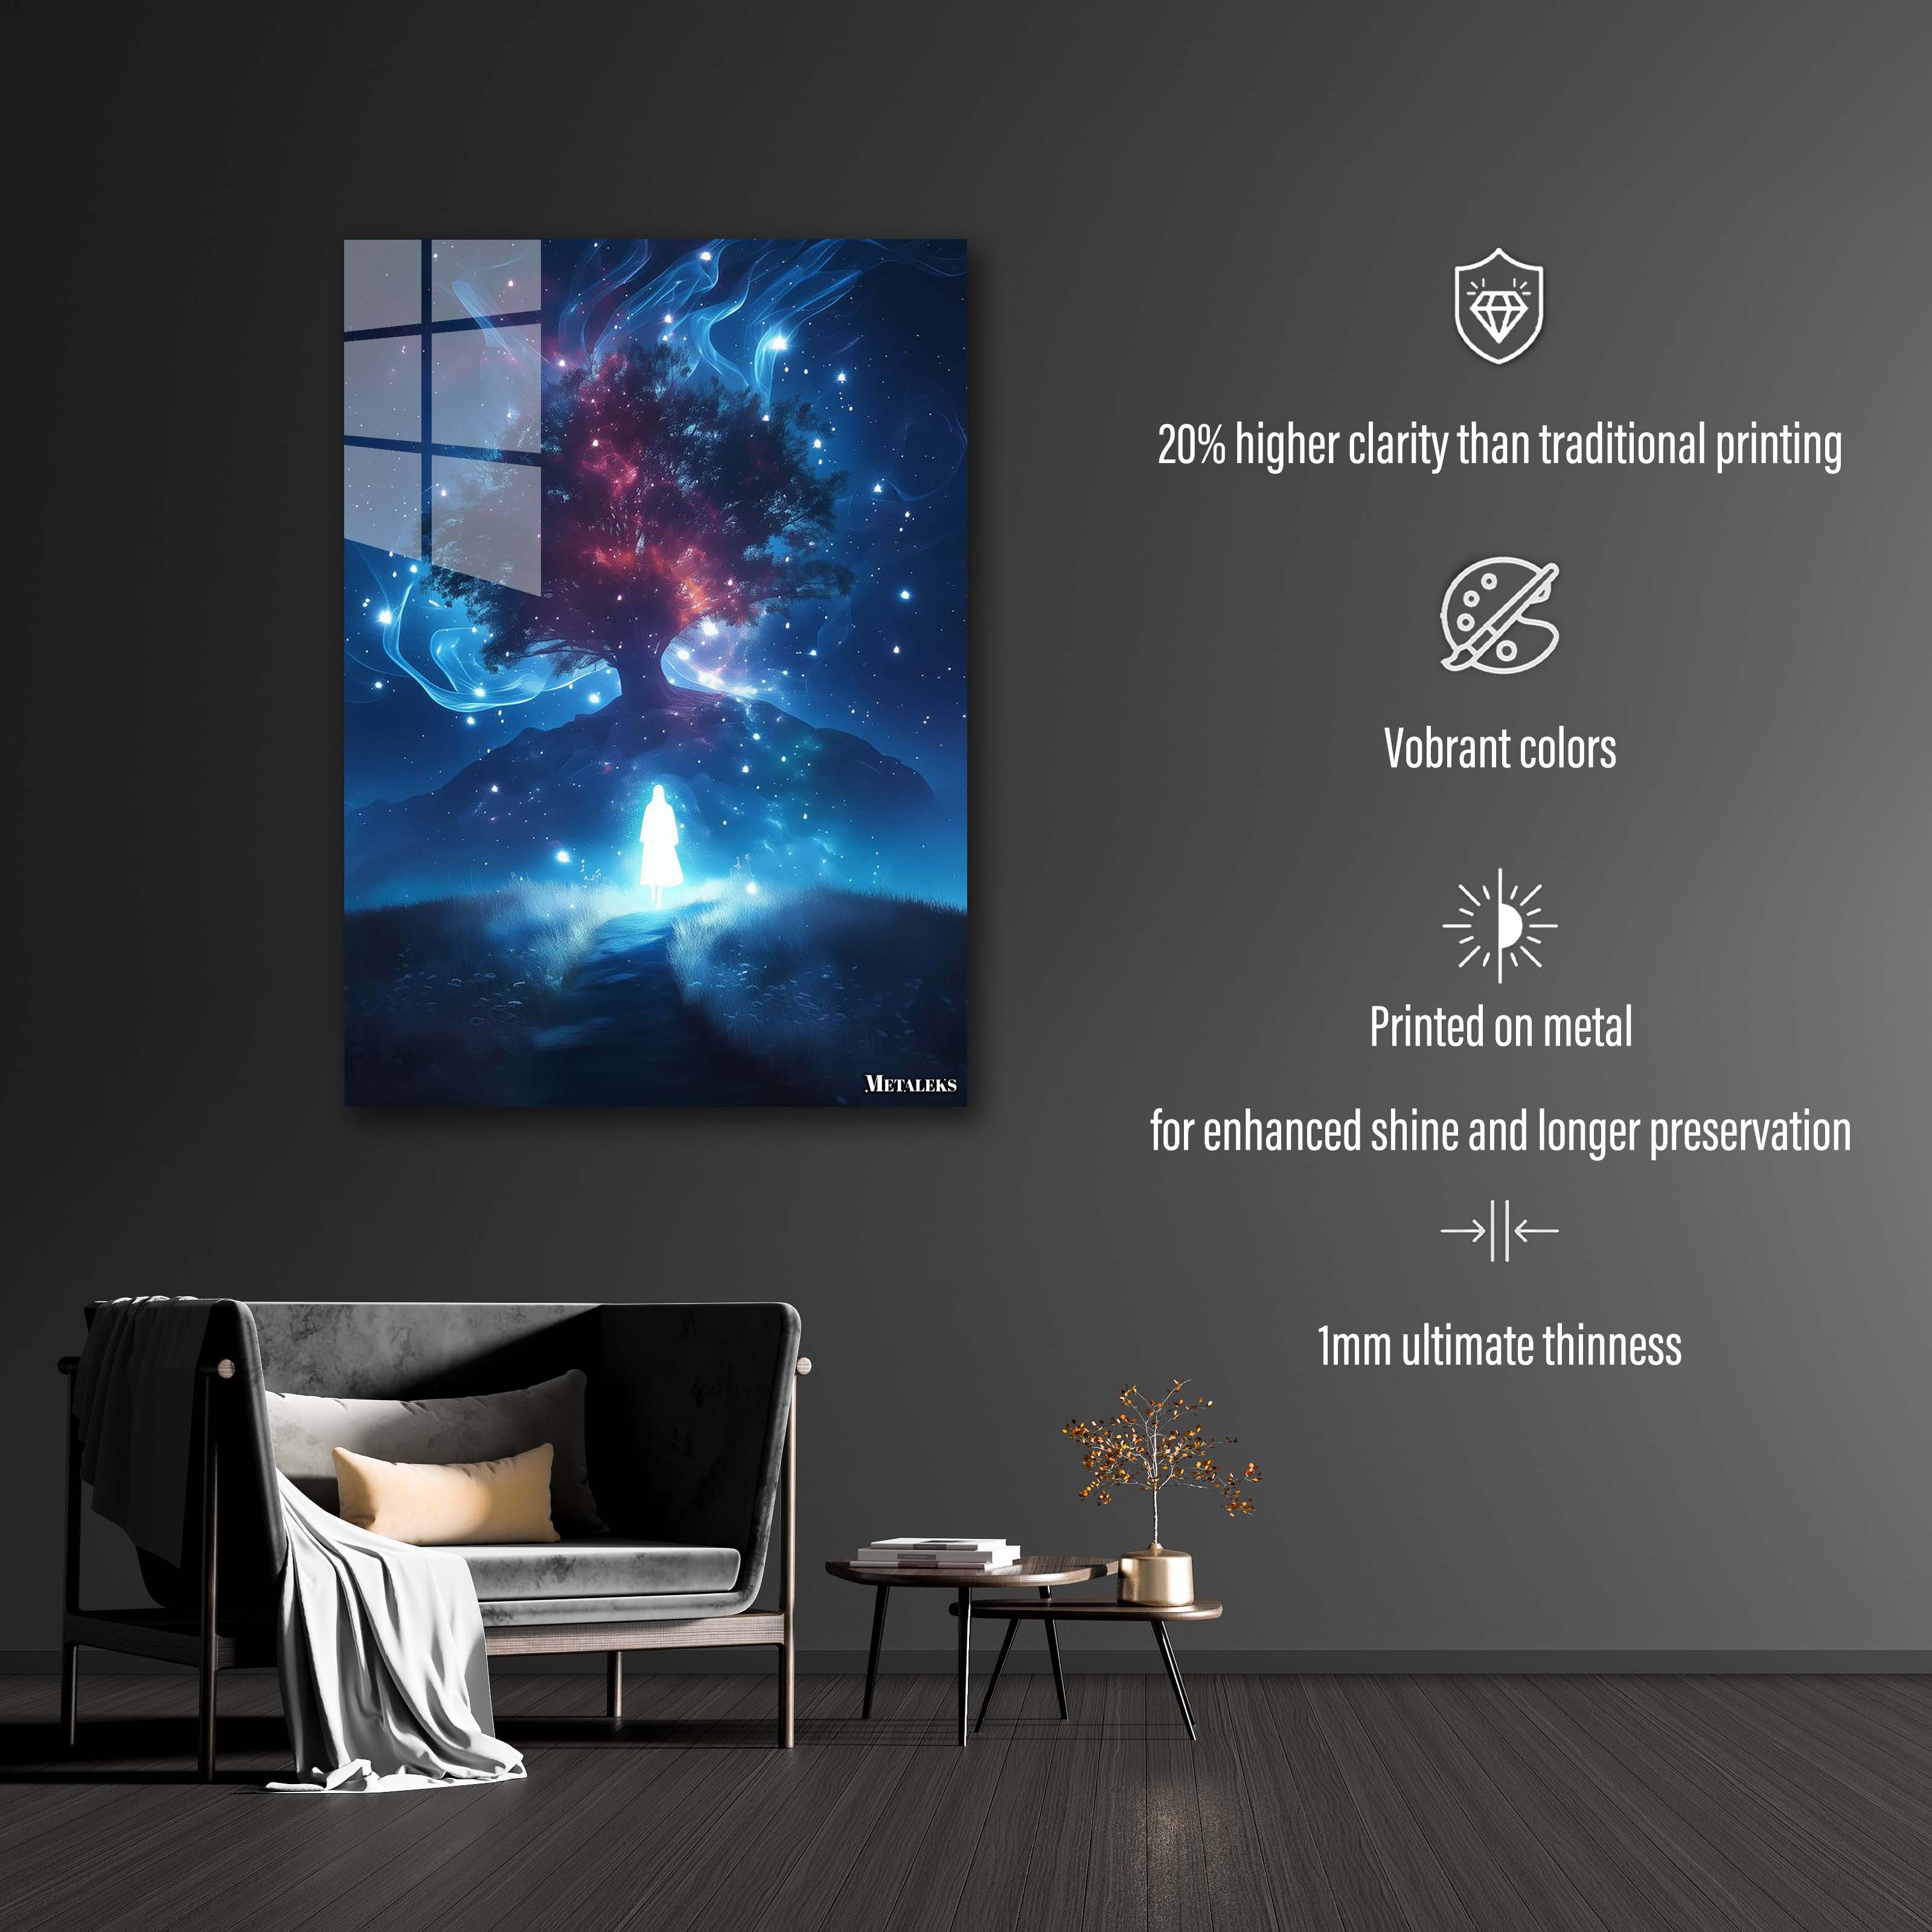 Ethereal-designed by @Vizio